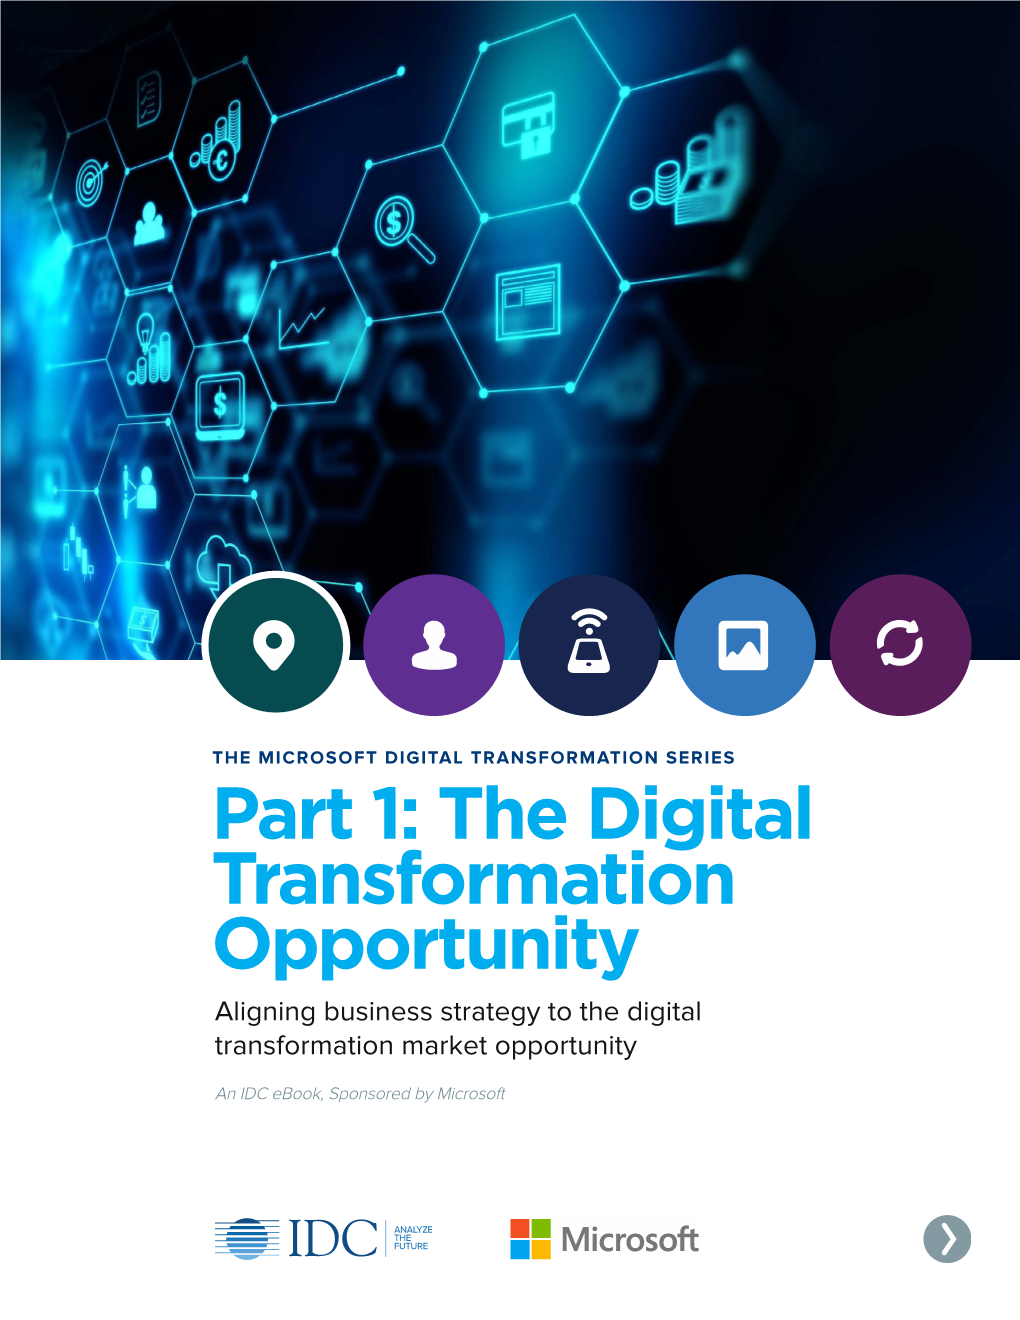 Part 1: the Digital Transformation Opportunity Aligning Business Strategy to the Digital Transformation Market Opportunity